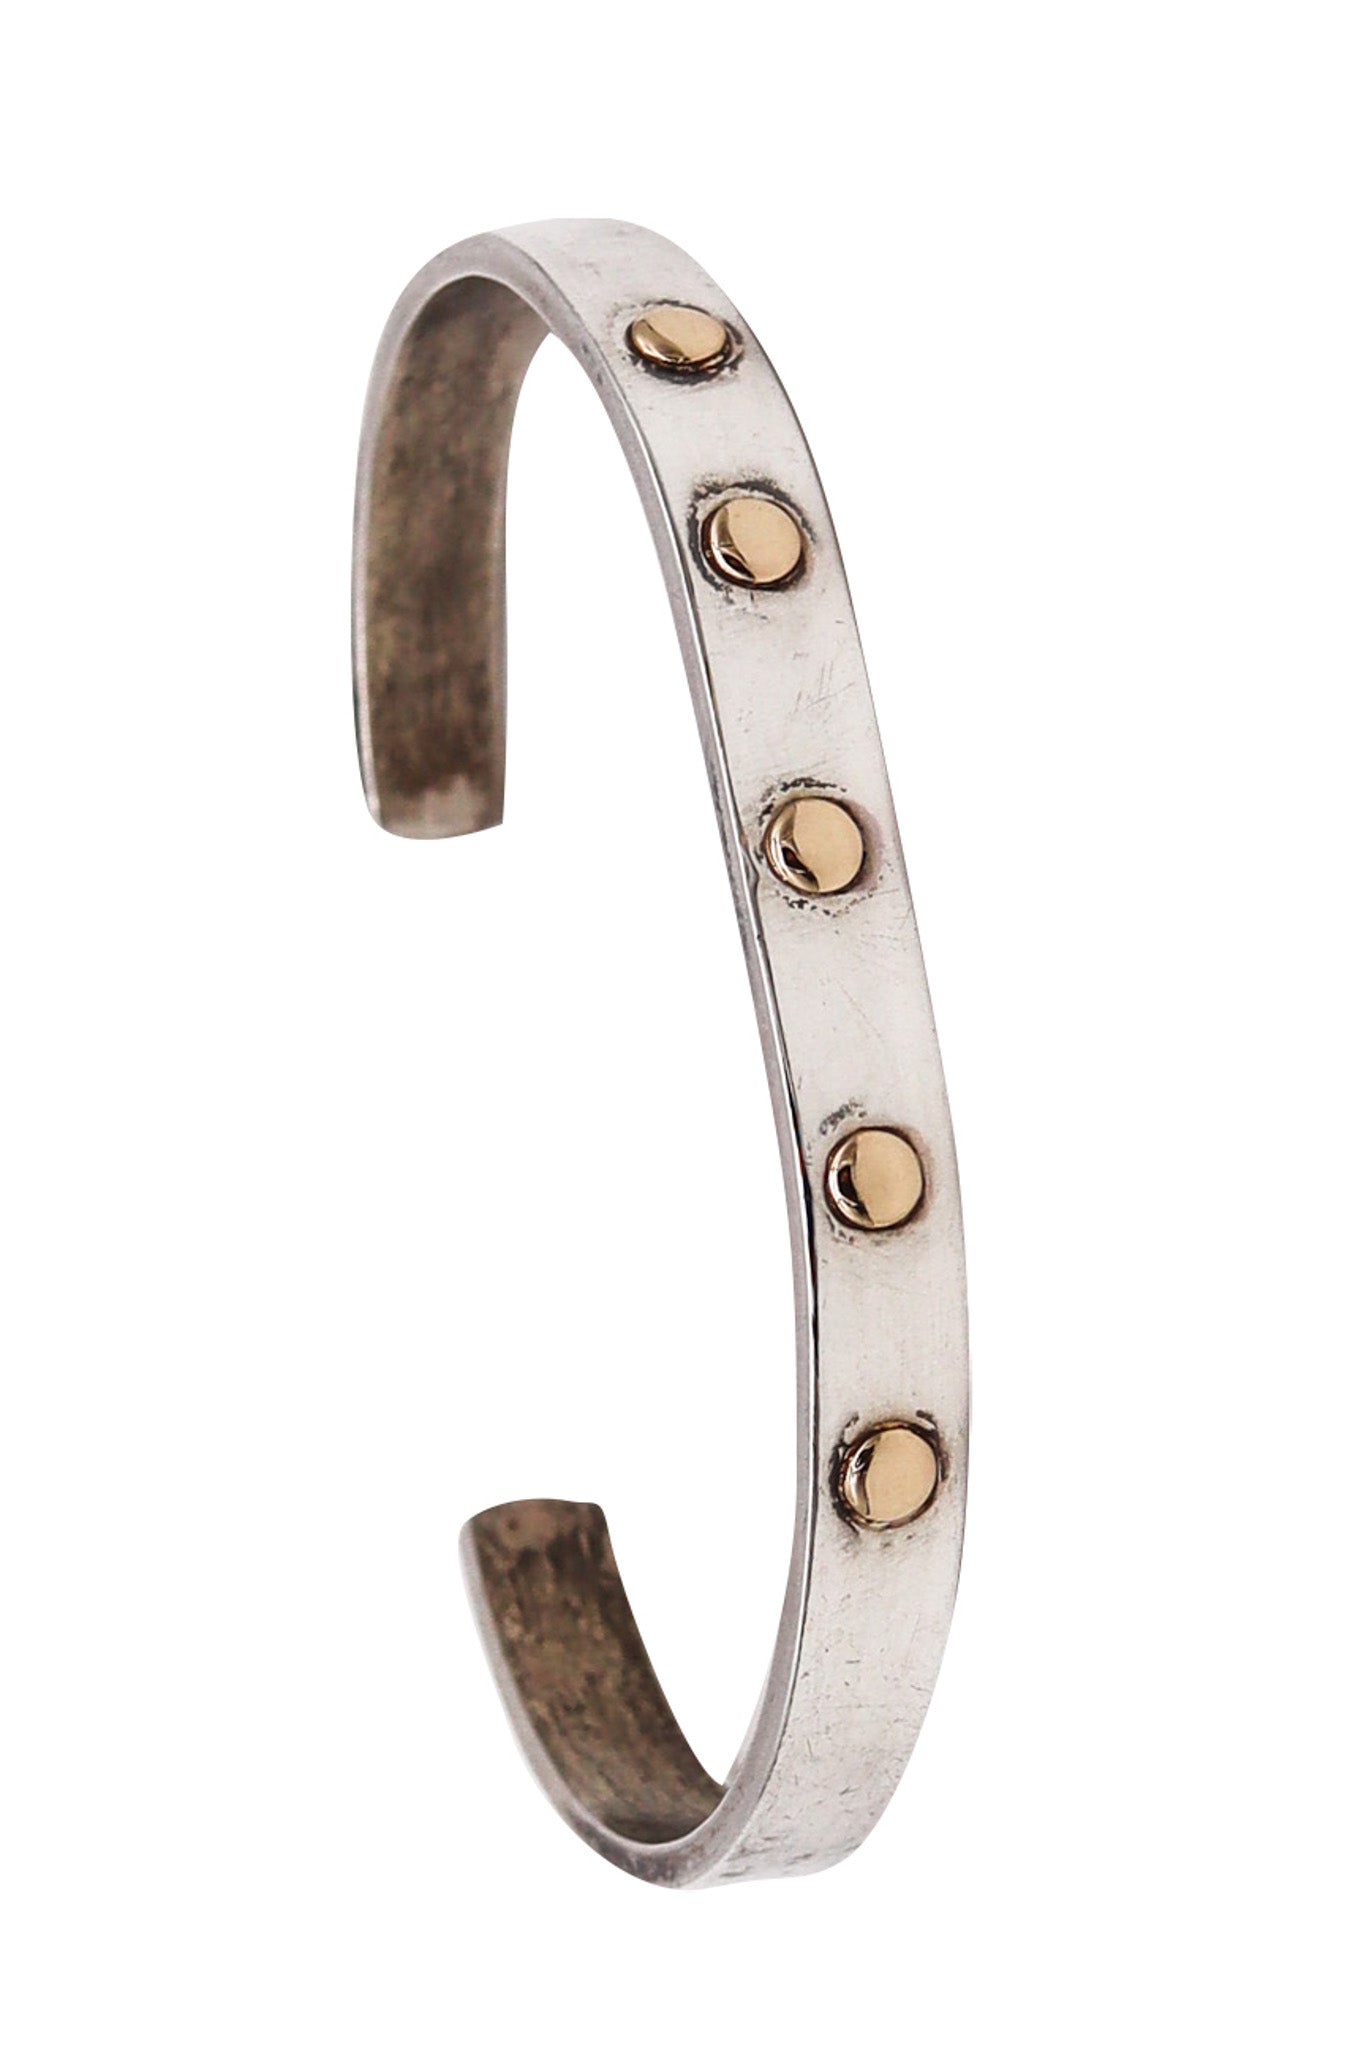 -Pierre Cardin 1970 Paris Geometric Dots Cuff Bracelet In 14Kt Yellow Gold And Sterling